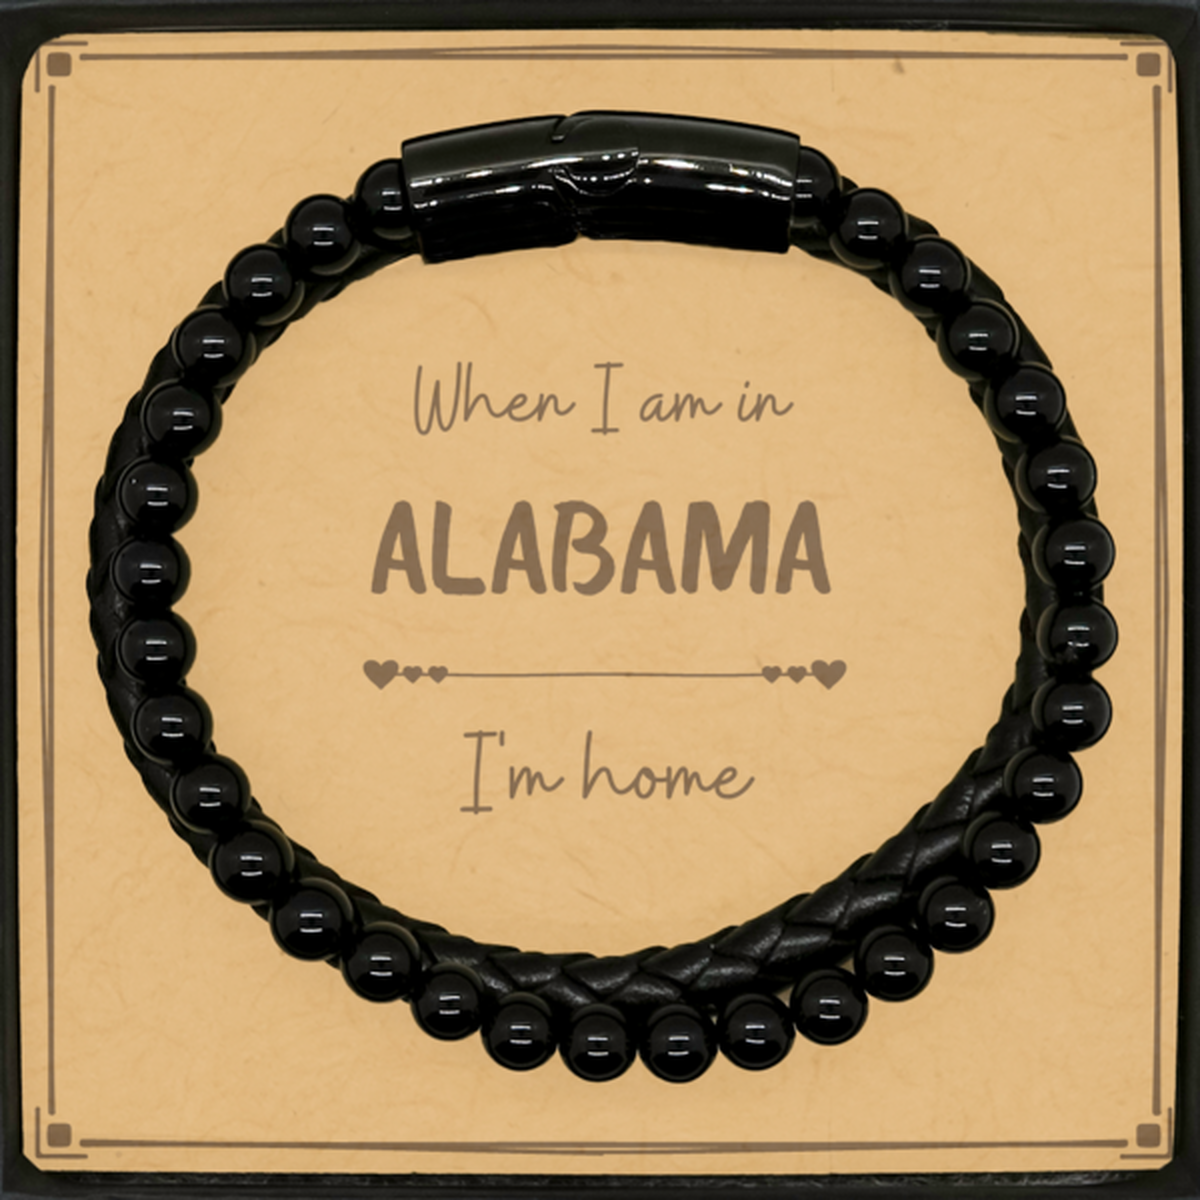 When I am in Alabama I'm home Stone Leather Bracelets, Message Card Gifts For Alabama, State Alabama Birthday Gifts for Friends Coworker